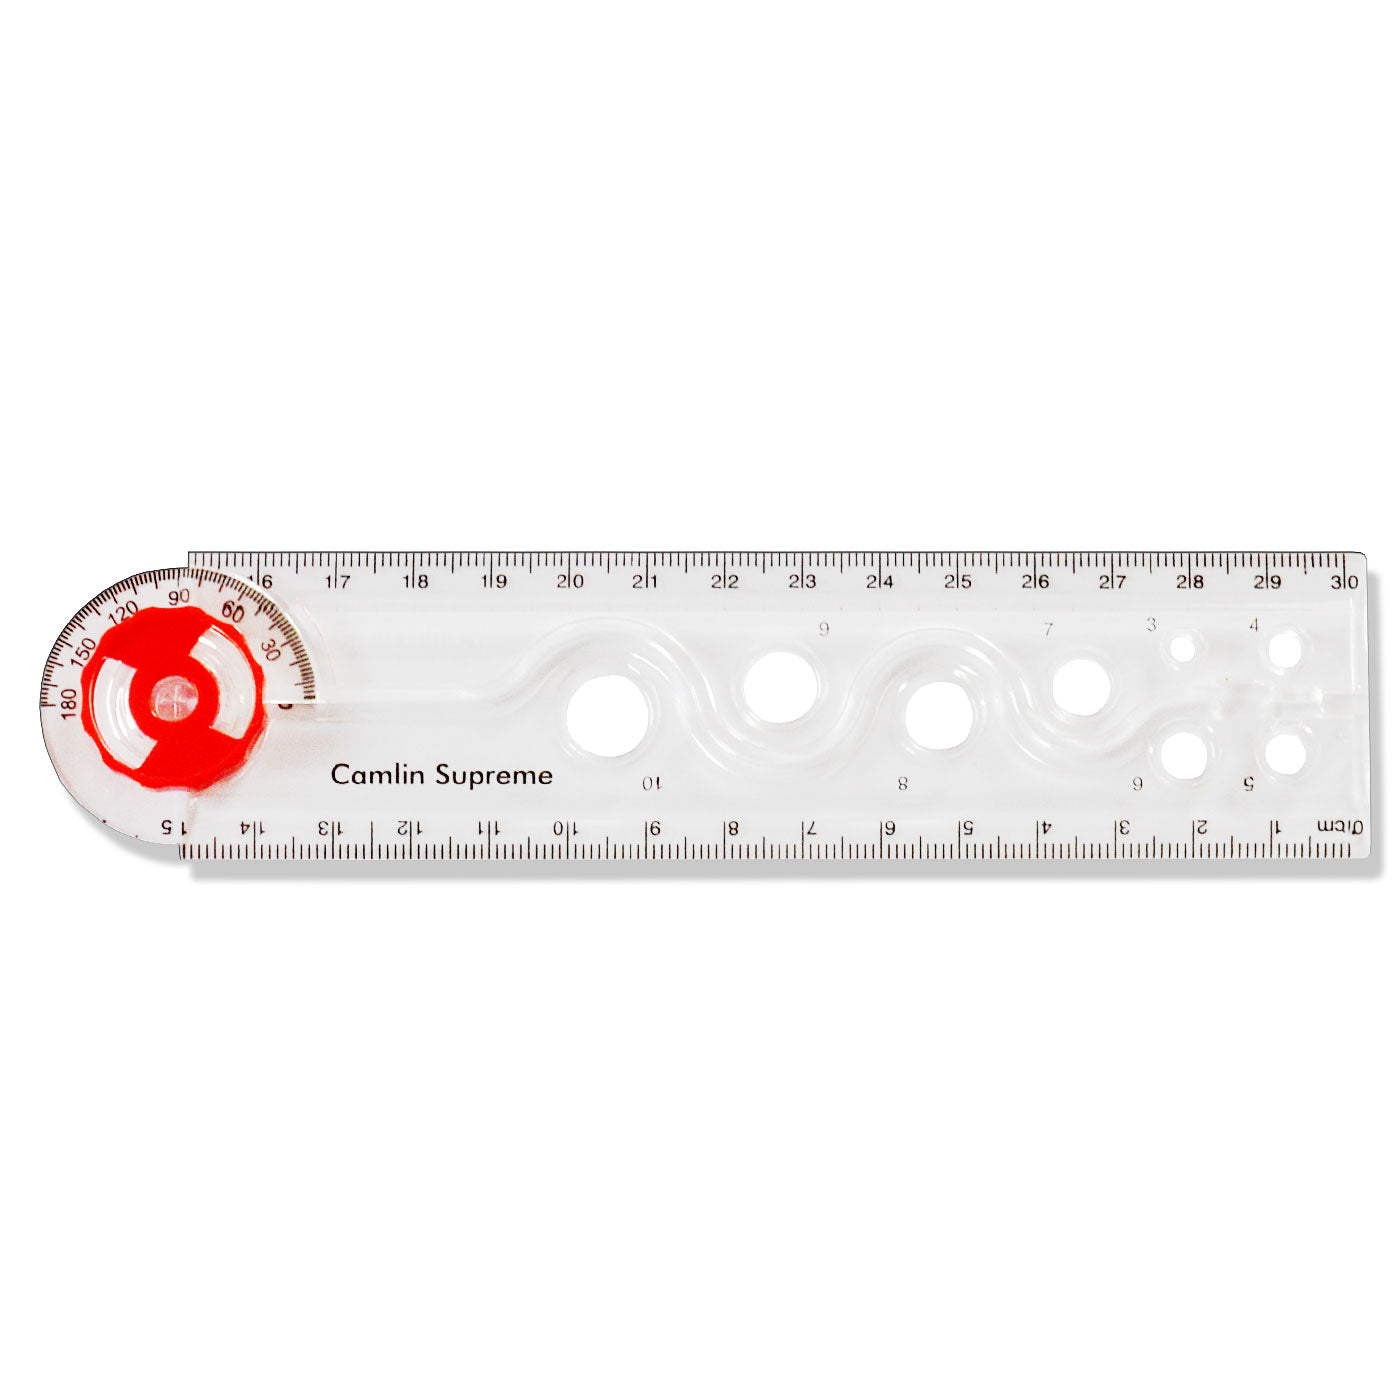 Camlin Supreme Foldable Ruler with Protractor 30 cm